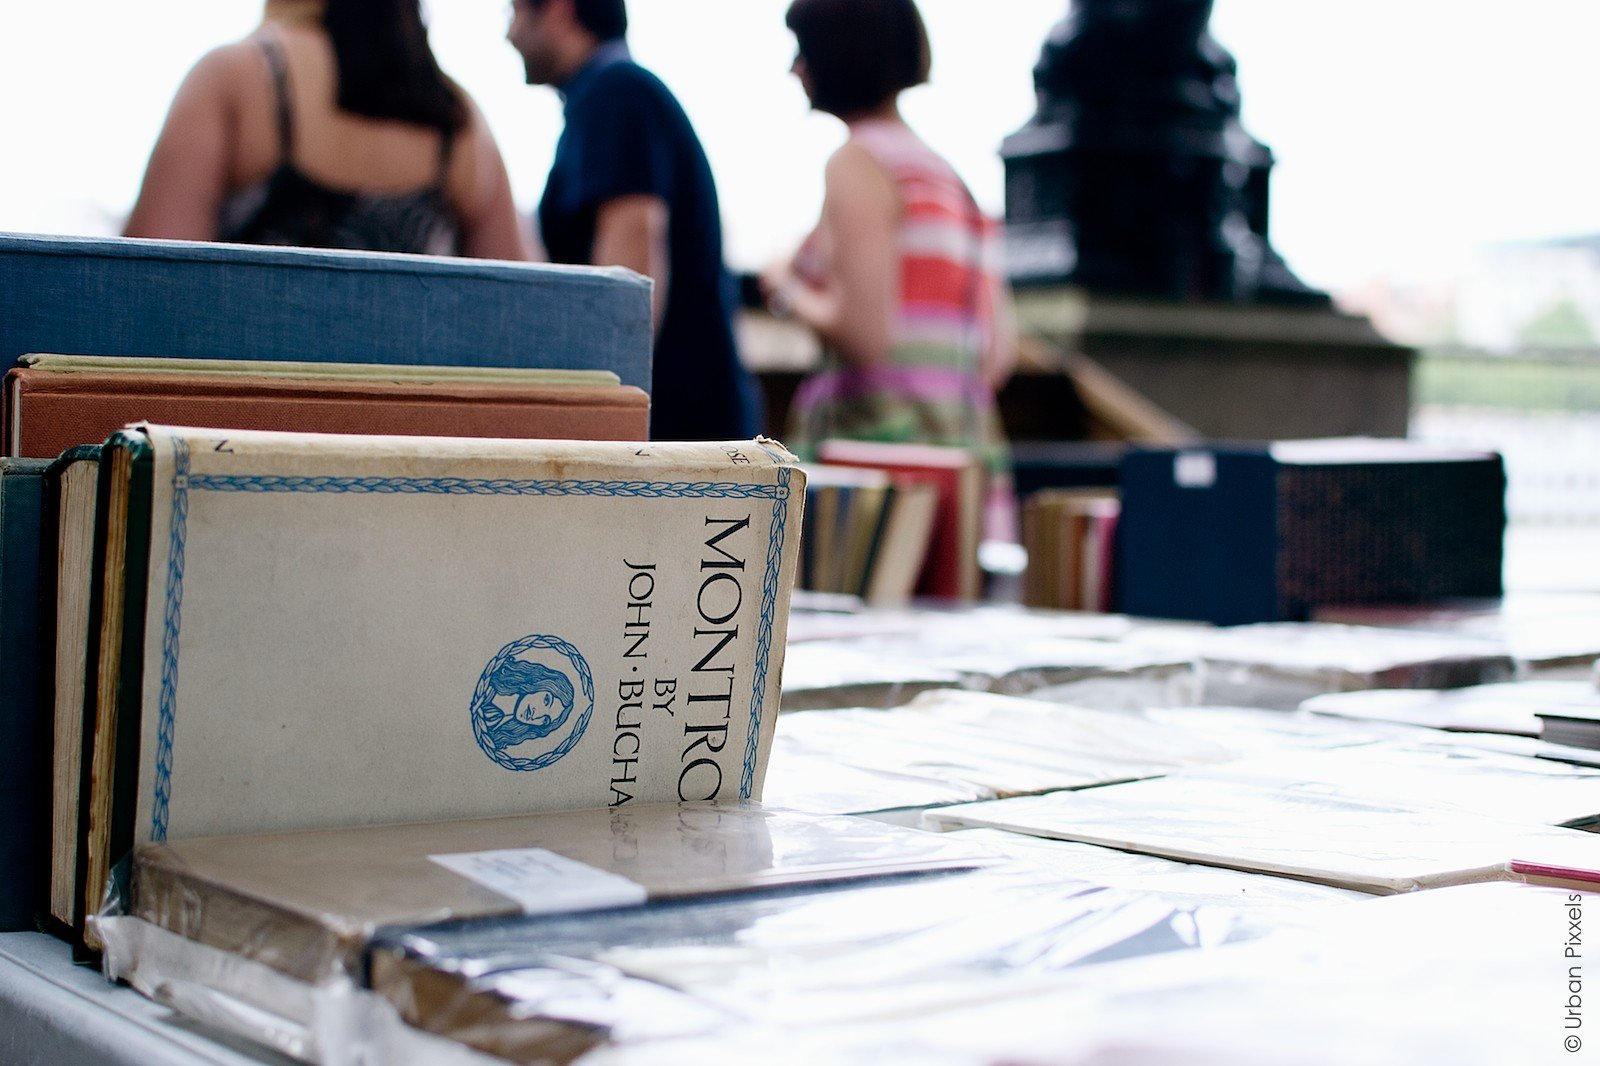 Southbank Second-Hand and Antique Book Market in London